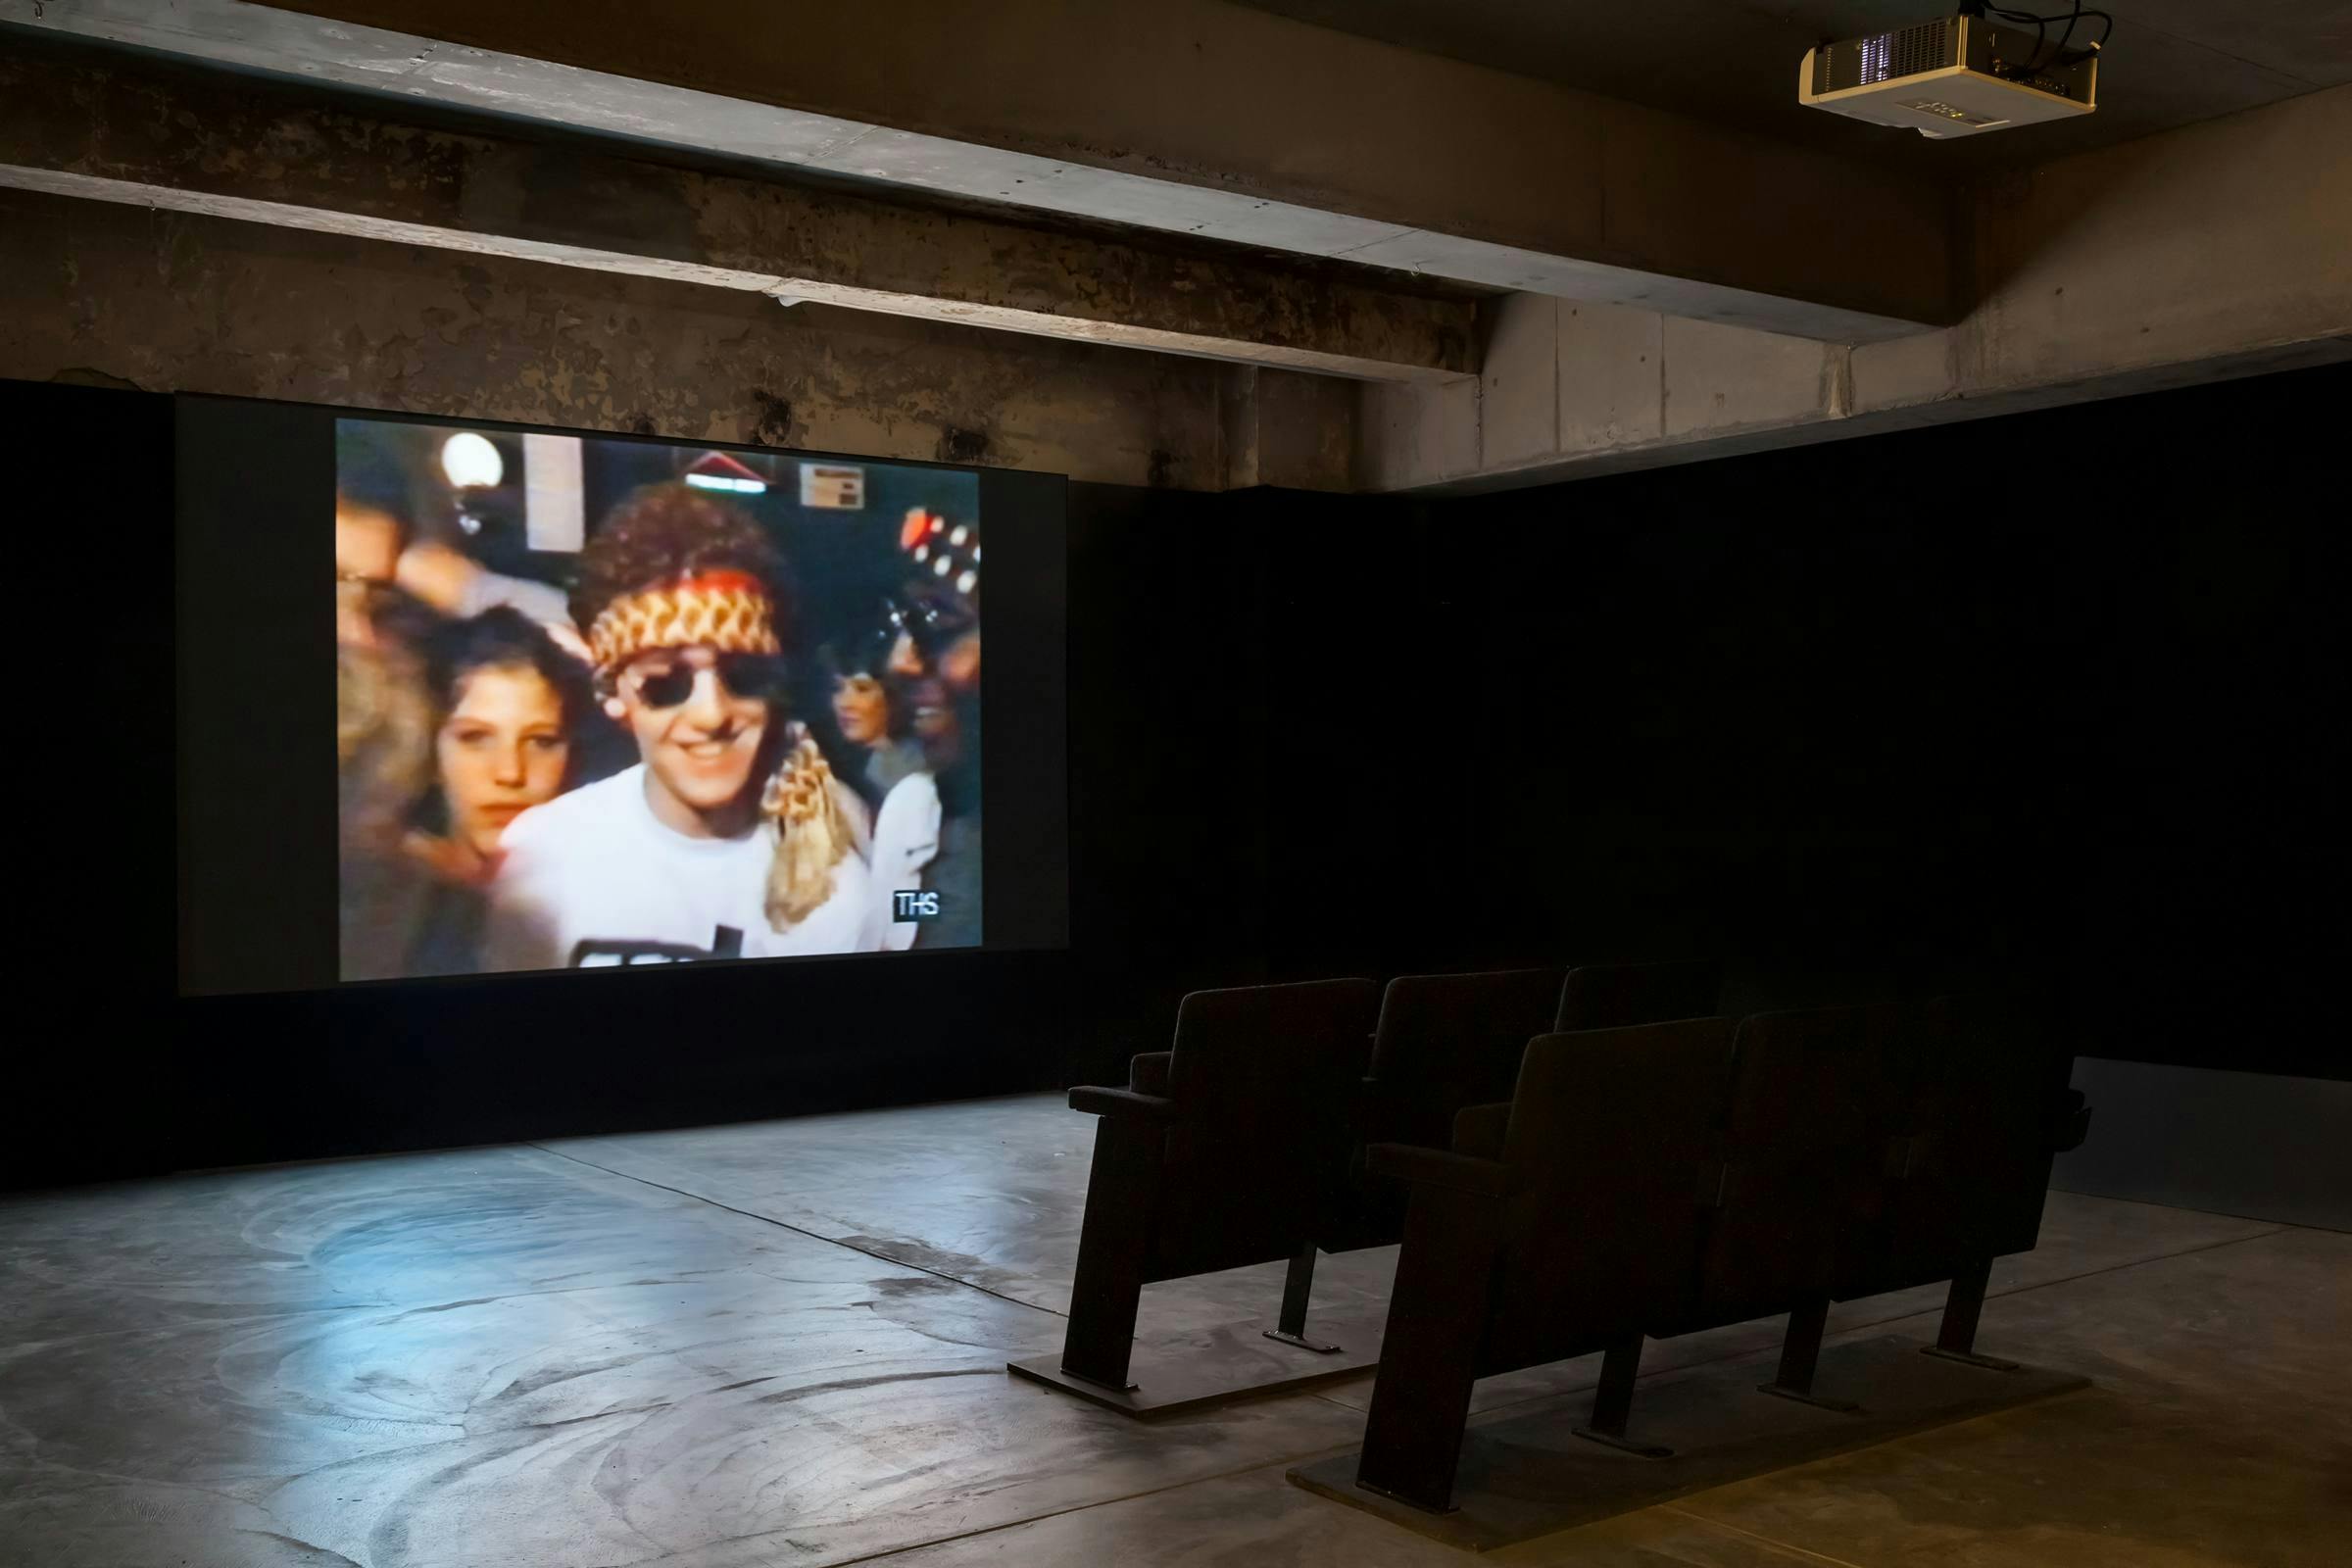 Image of a film playing in a darkened gallery space with two rows of seats and a projector above